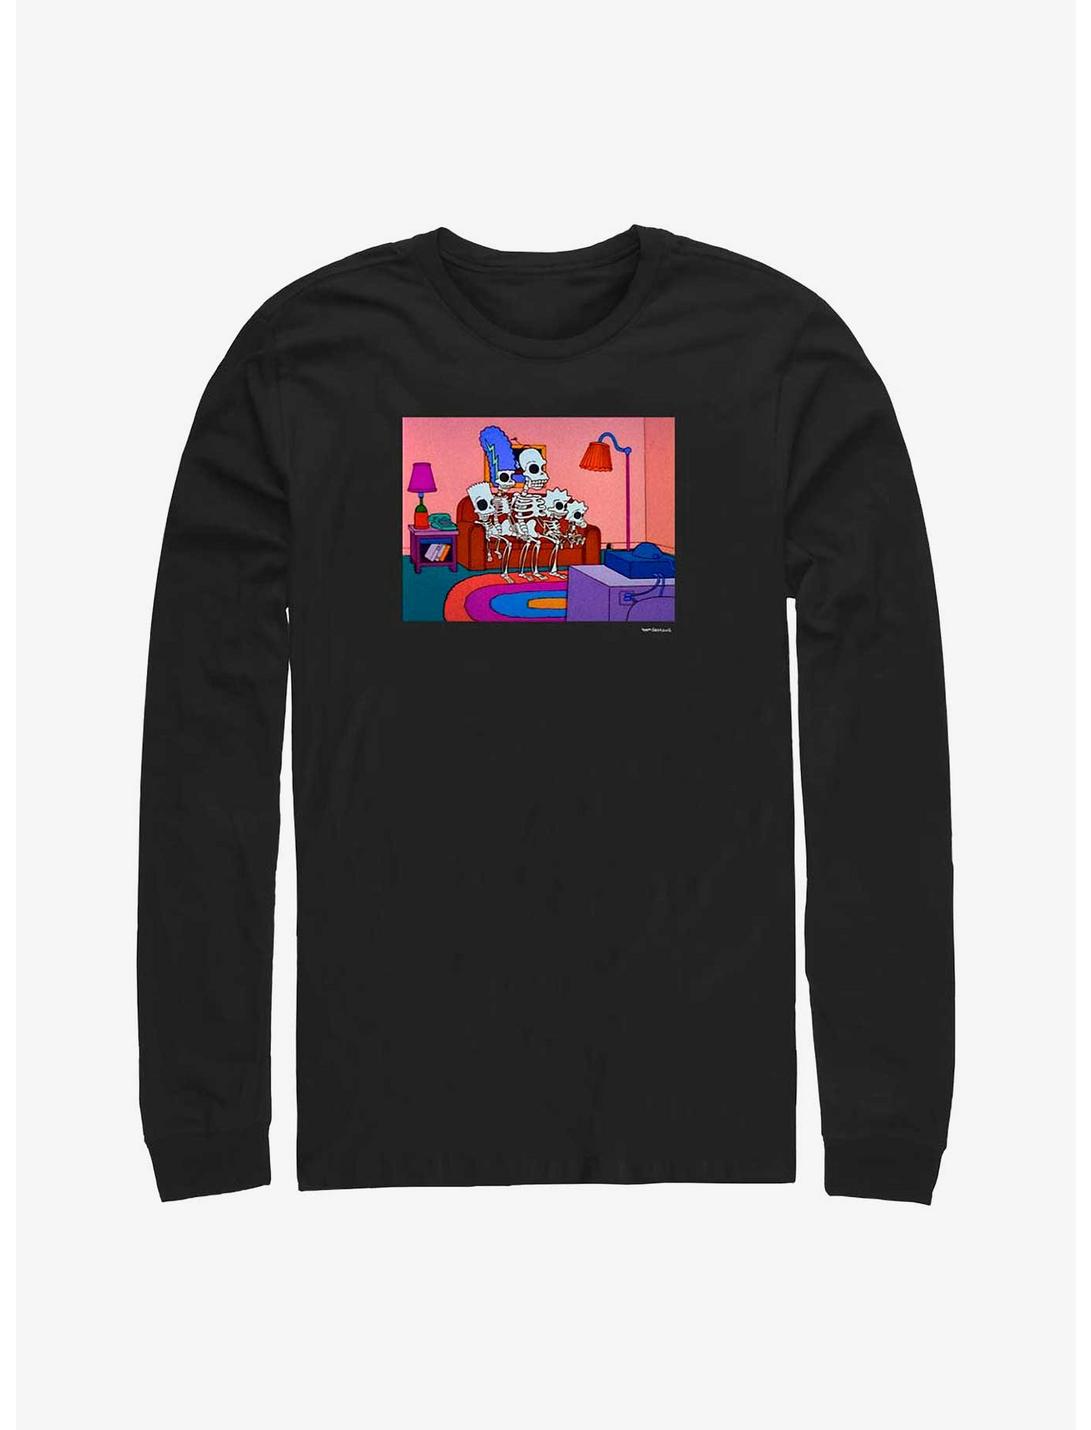 The Simpsons Treehouse Of Horror Intro Couch Long-Sleeve T-Shirt, BLACK, hi-res